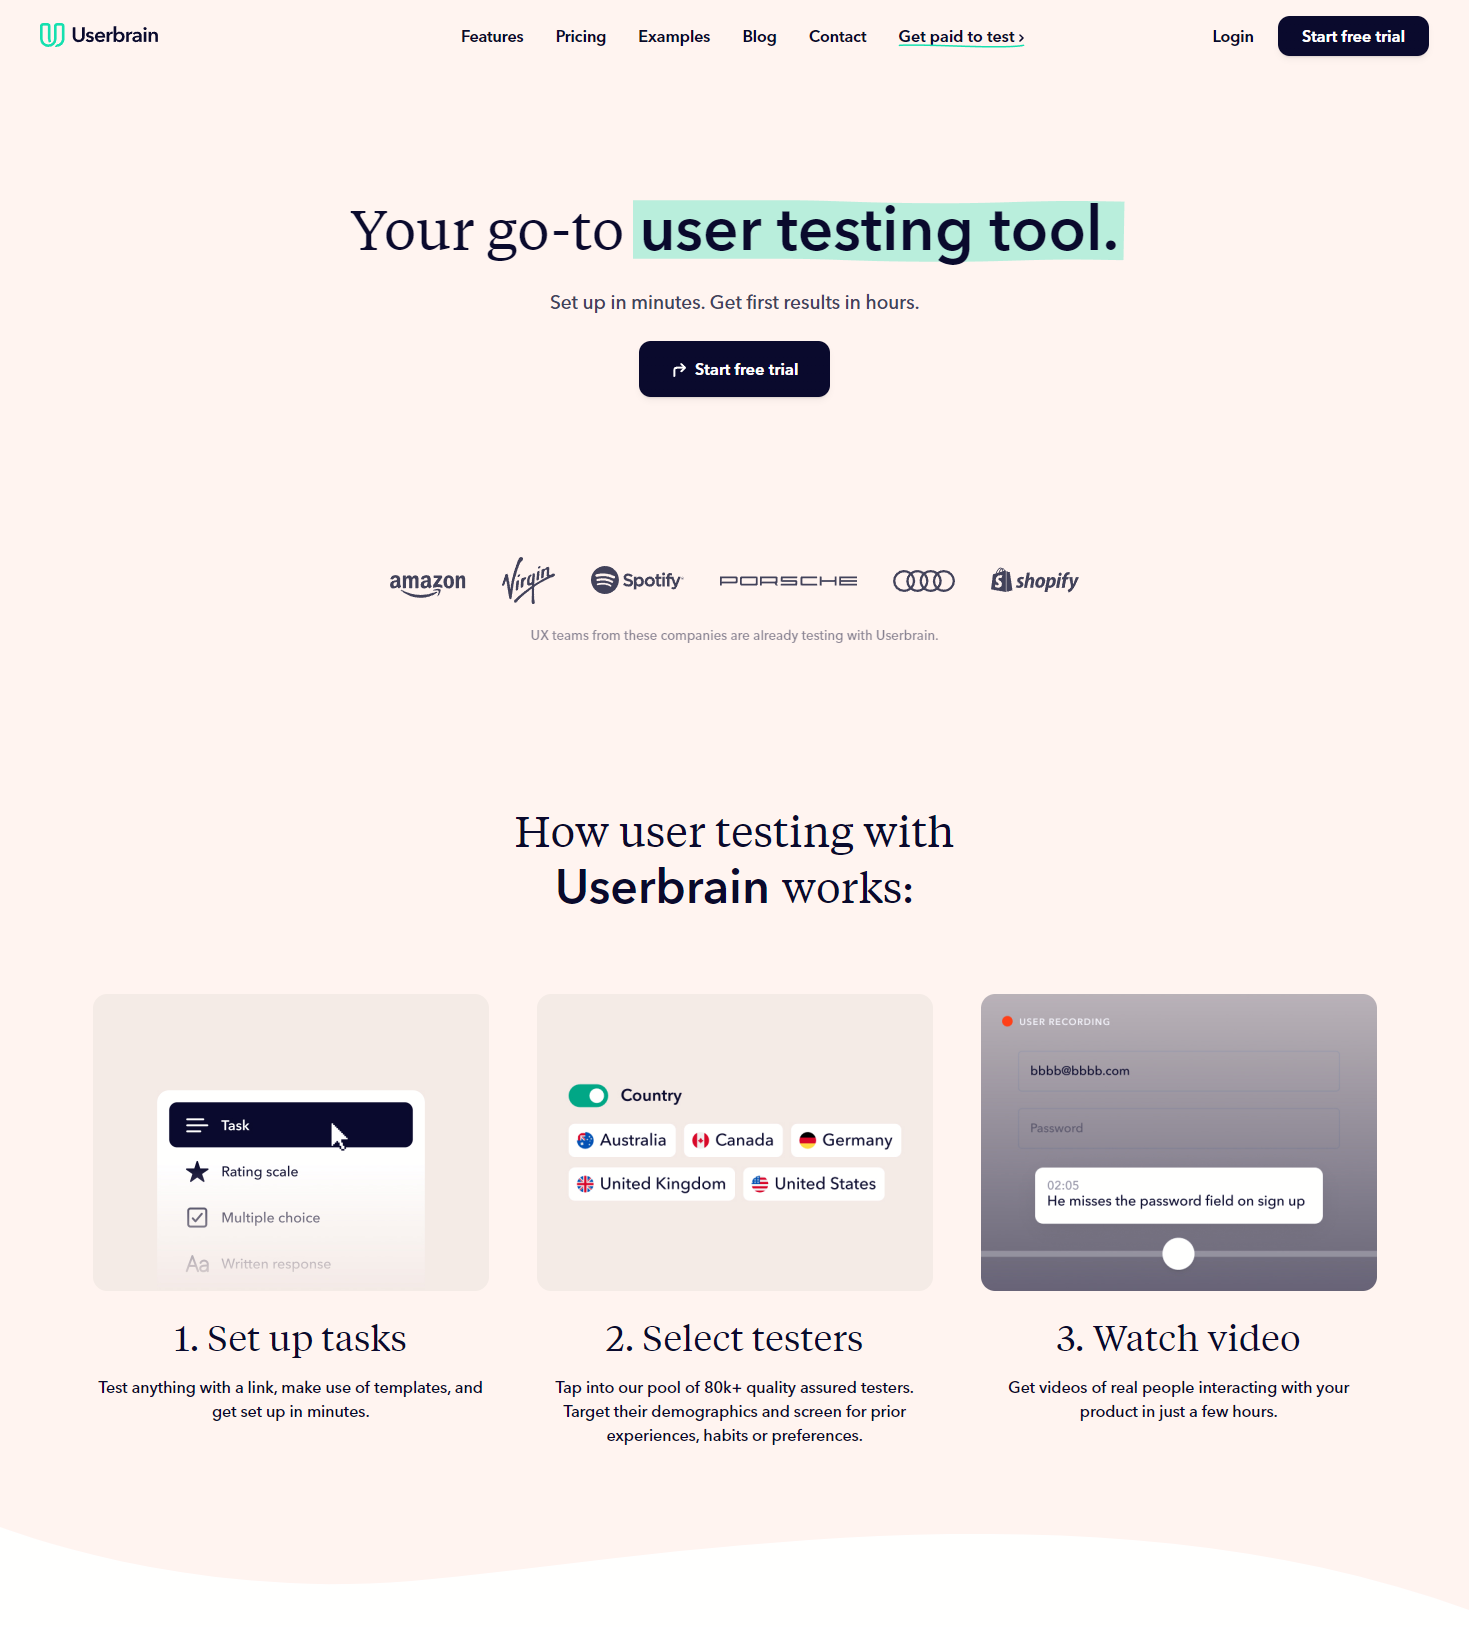 Userbrain_remote unmoderated_usability testing tool